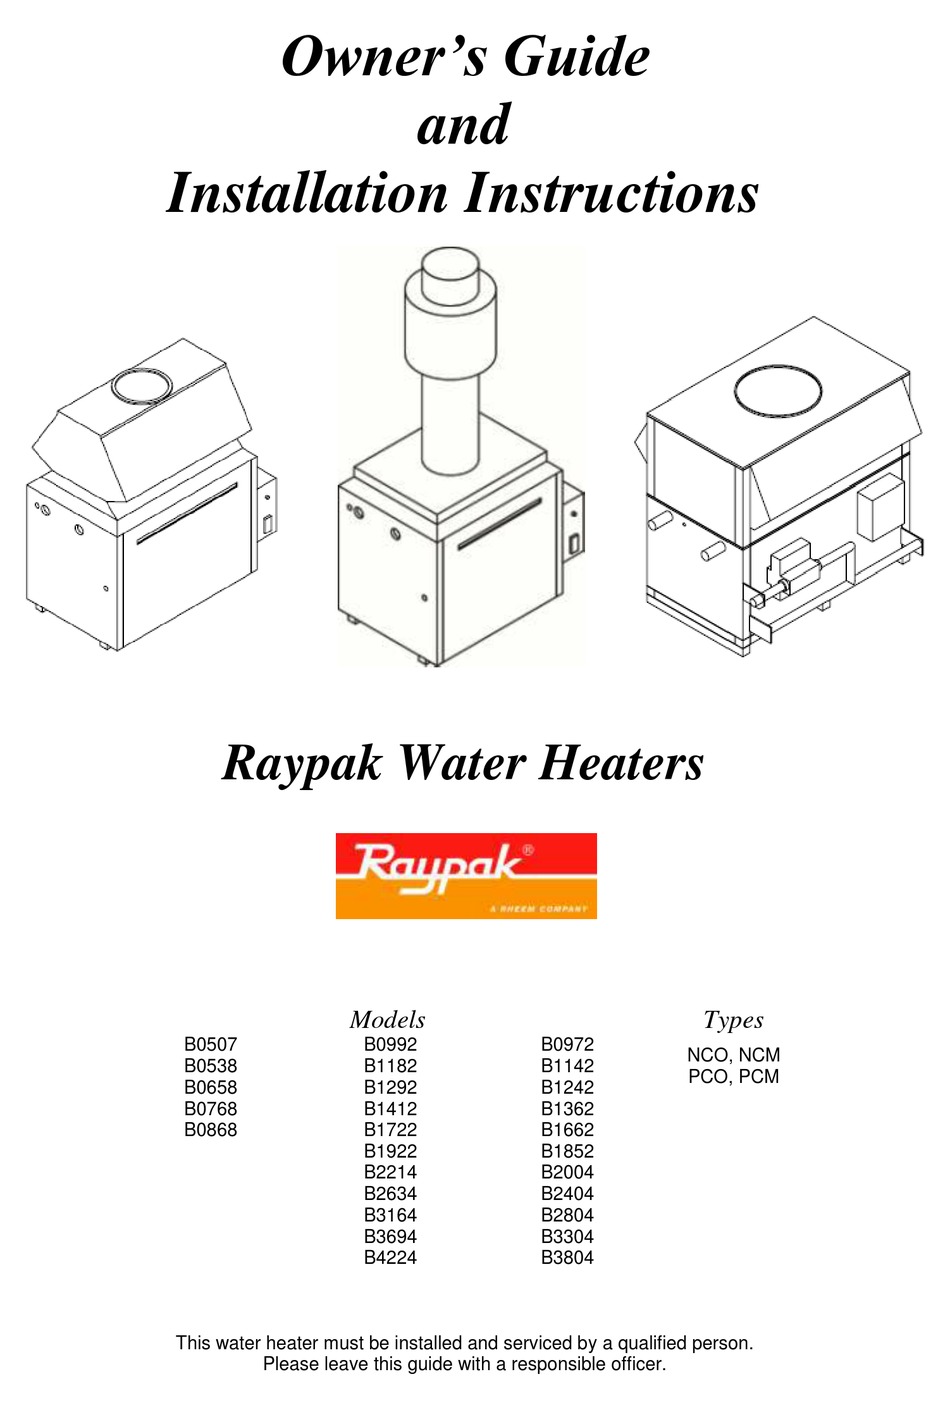 RAYPAK B0507 OWNER'S MANUAL AND INSTALLATION INSTRUCTIONS Pdf Download